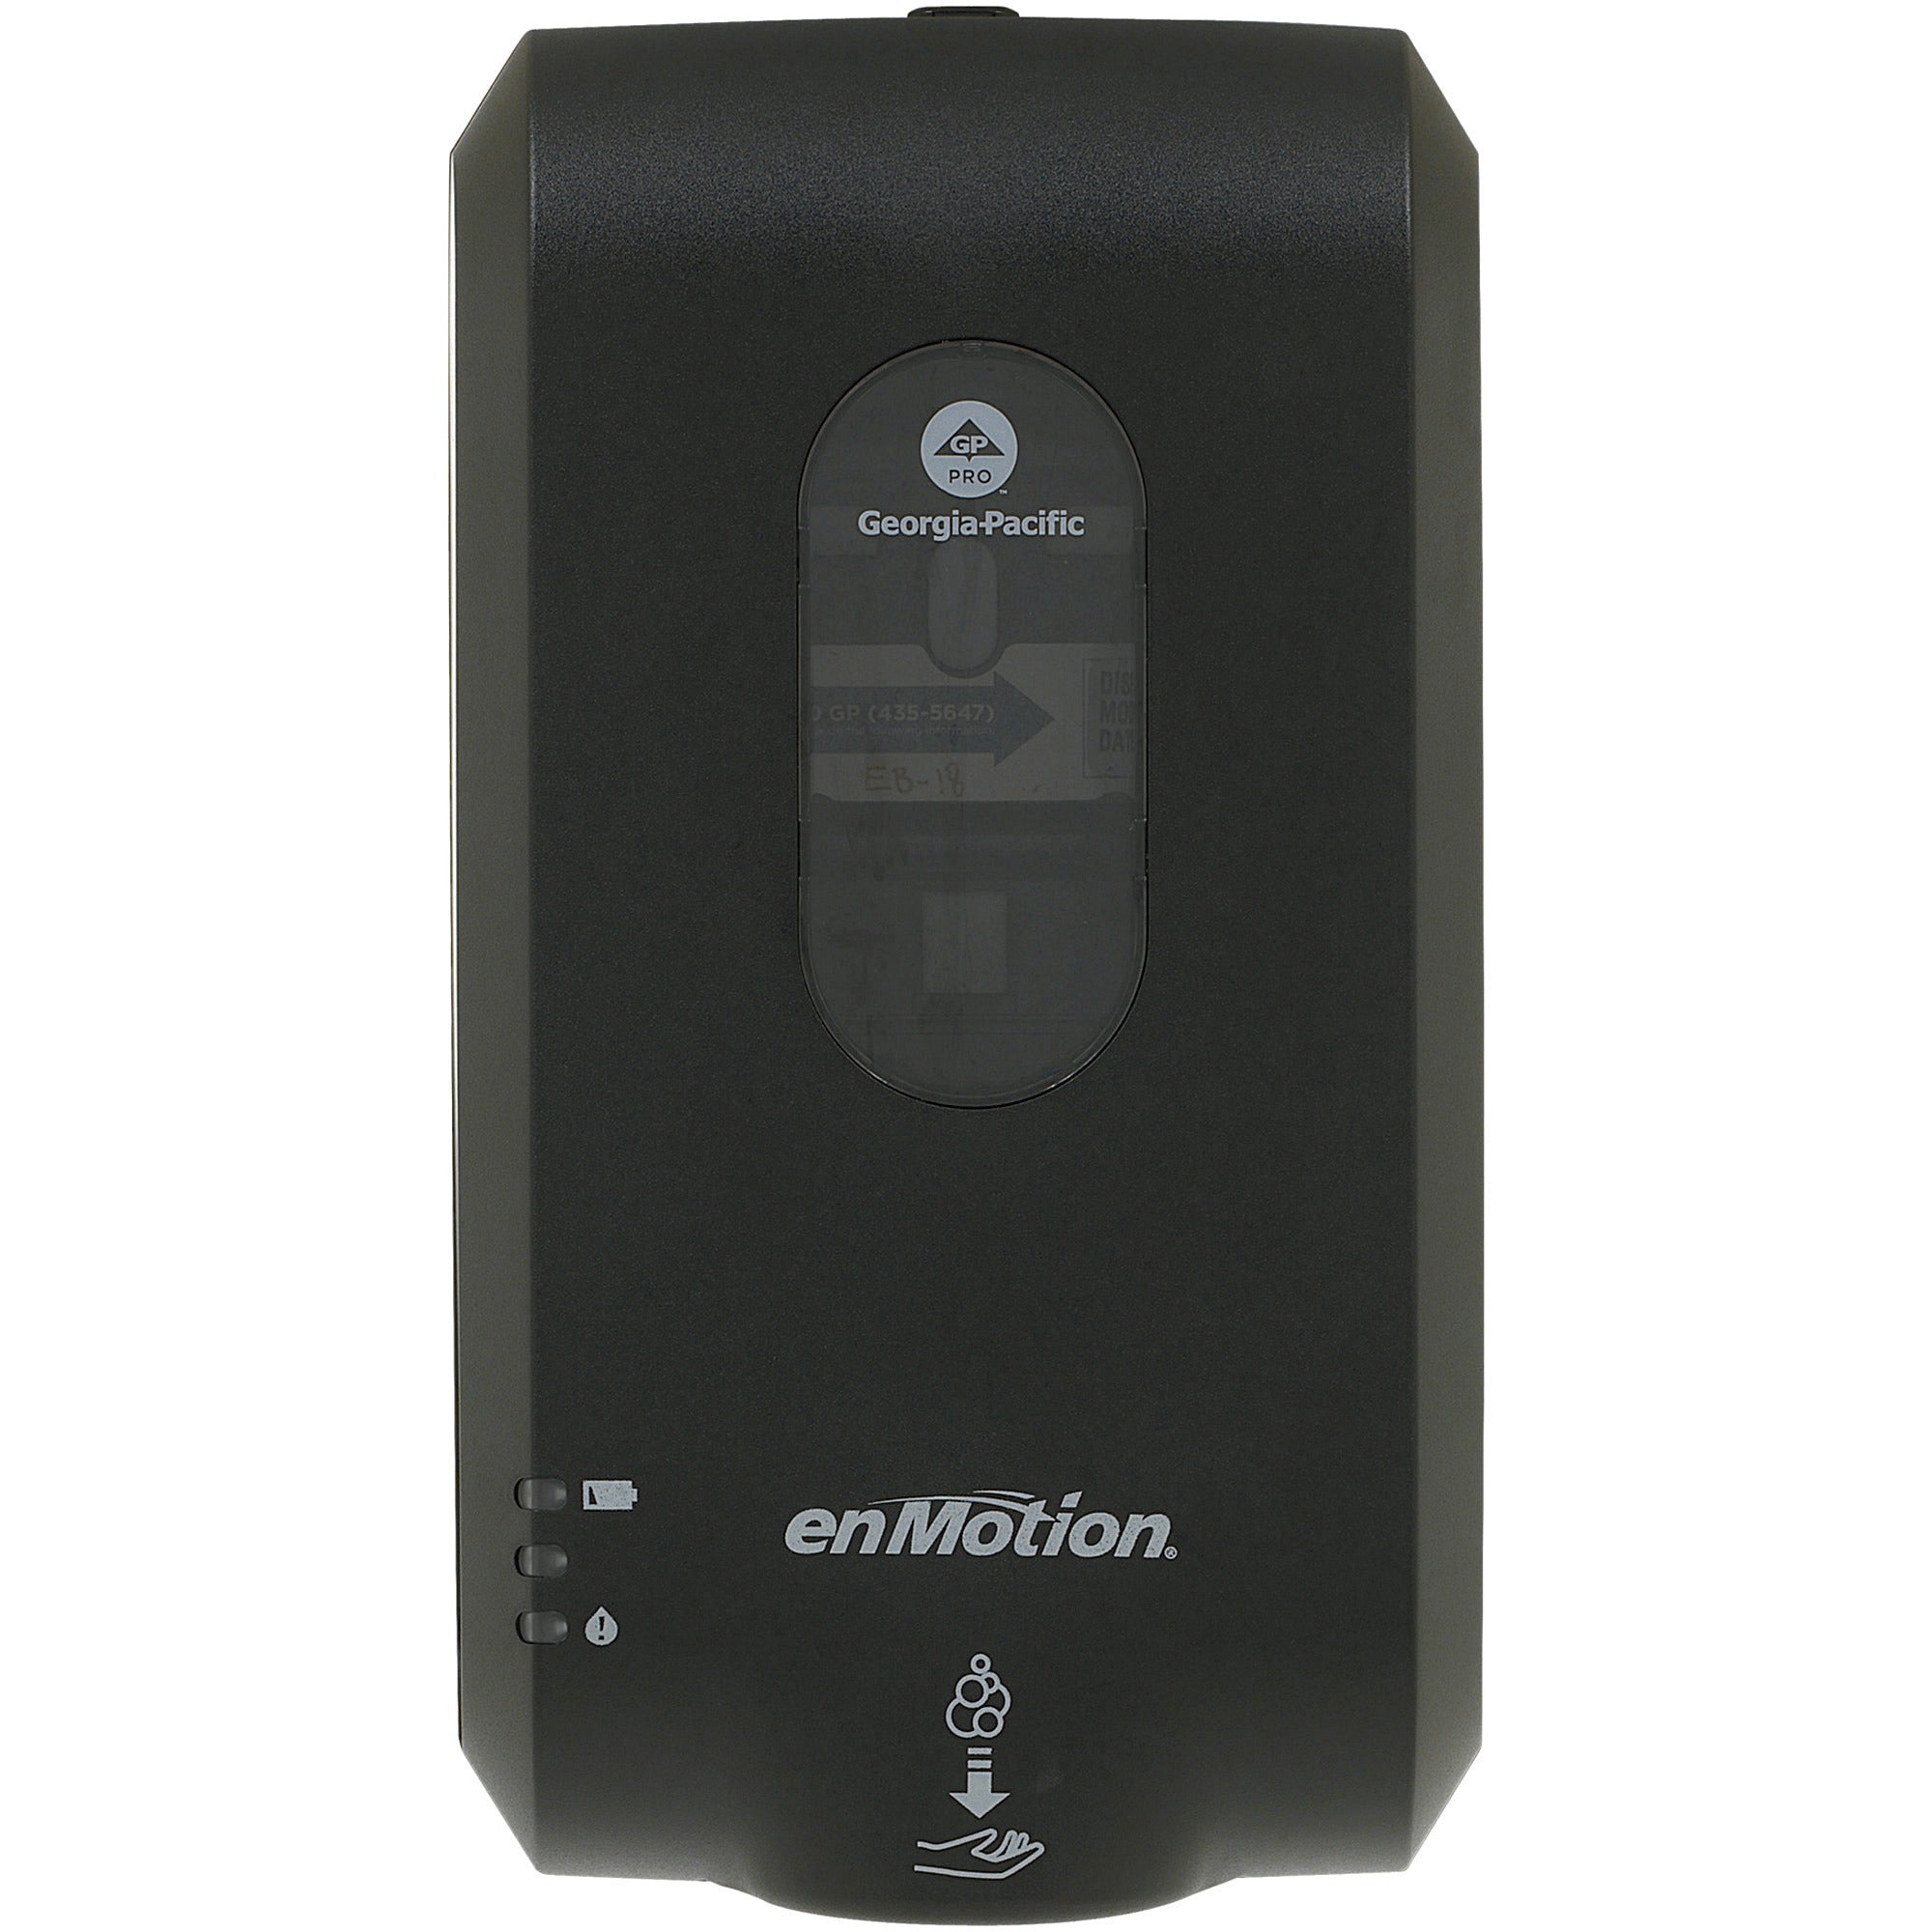 enmotion-gen2-automated-touchless-soap-&-sanitizer-dispenser-automatic-wall-mountable-touch-free-black-1-carton_gpc52057 - 1